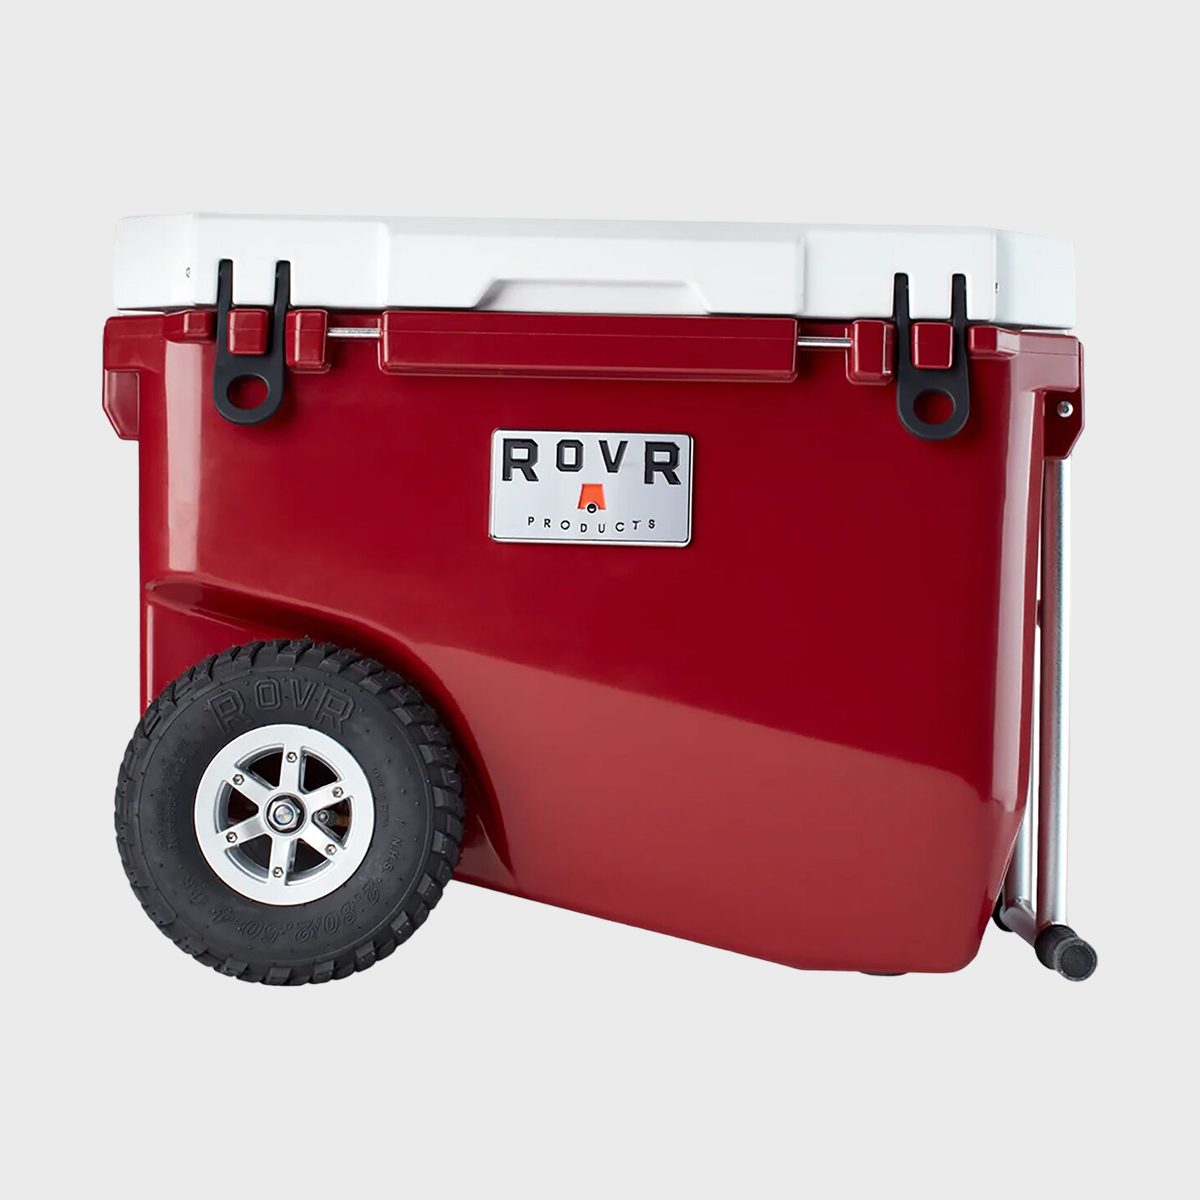 6 Best Coolers With Wheels 2023